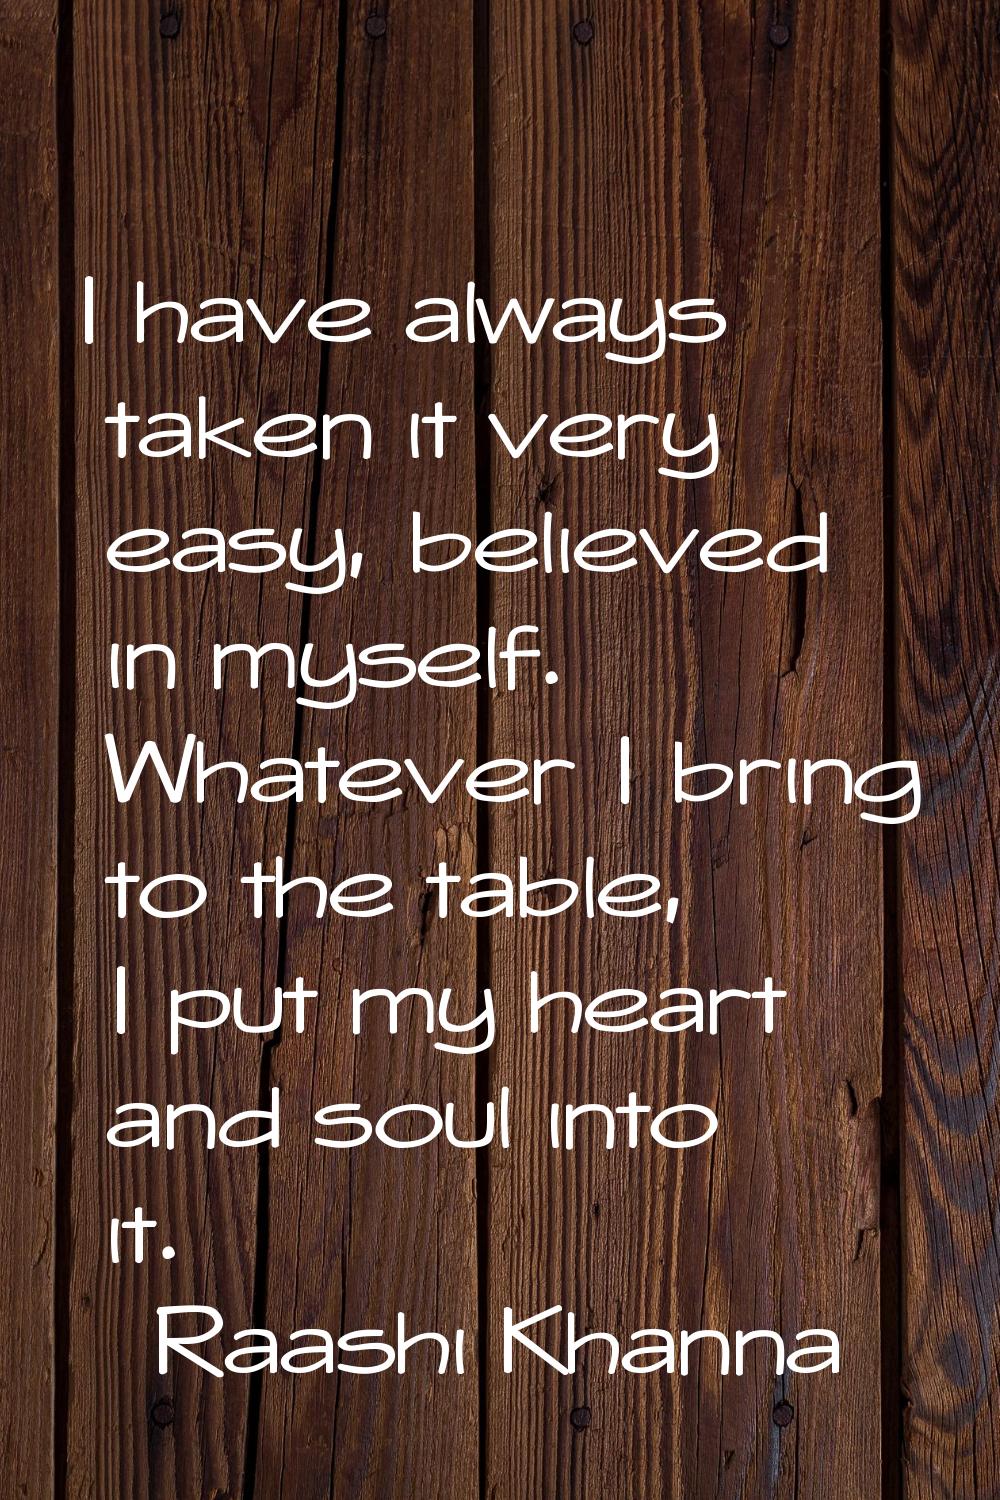 I have always taken it very easy, believed in myself. Whatever I bring to the table, I put my heart